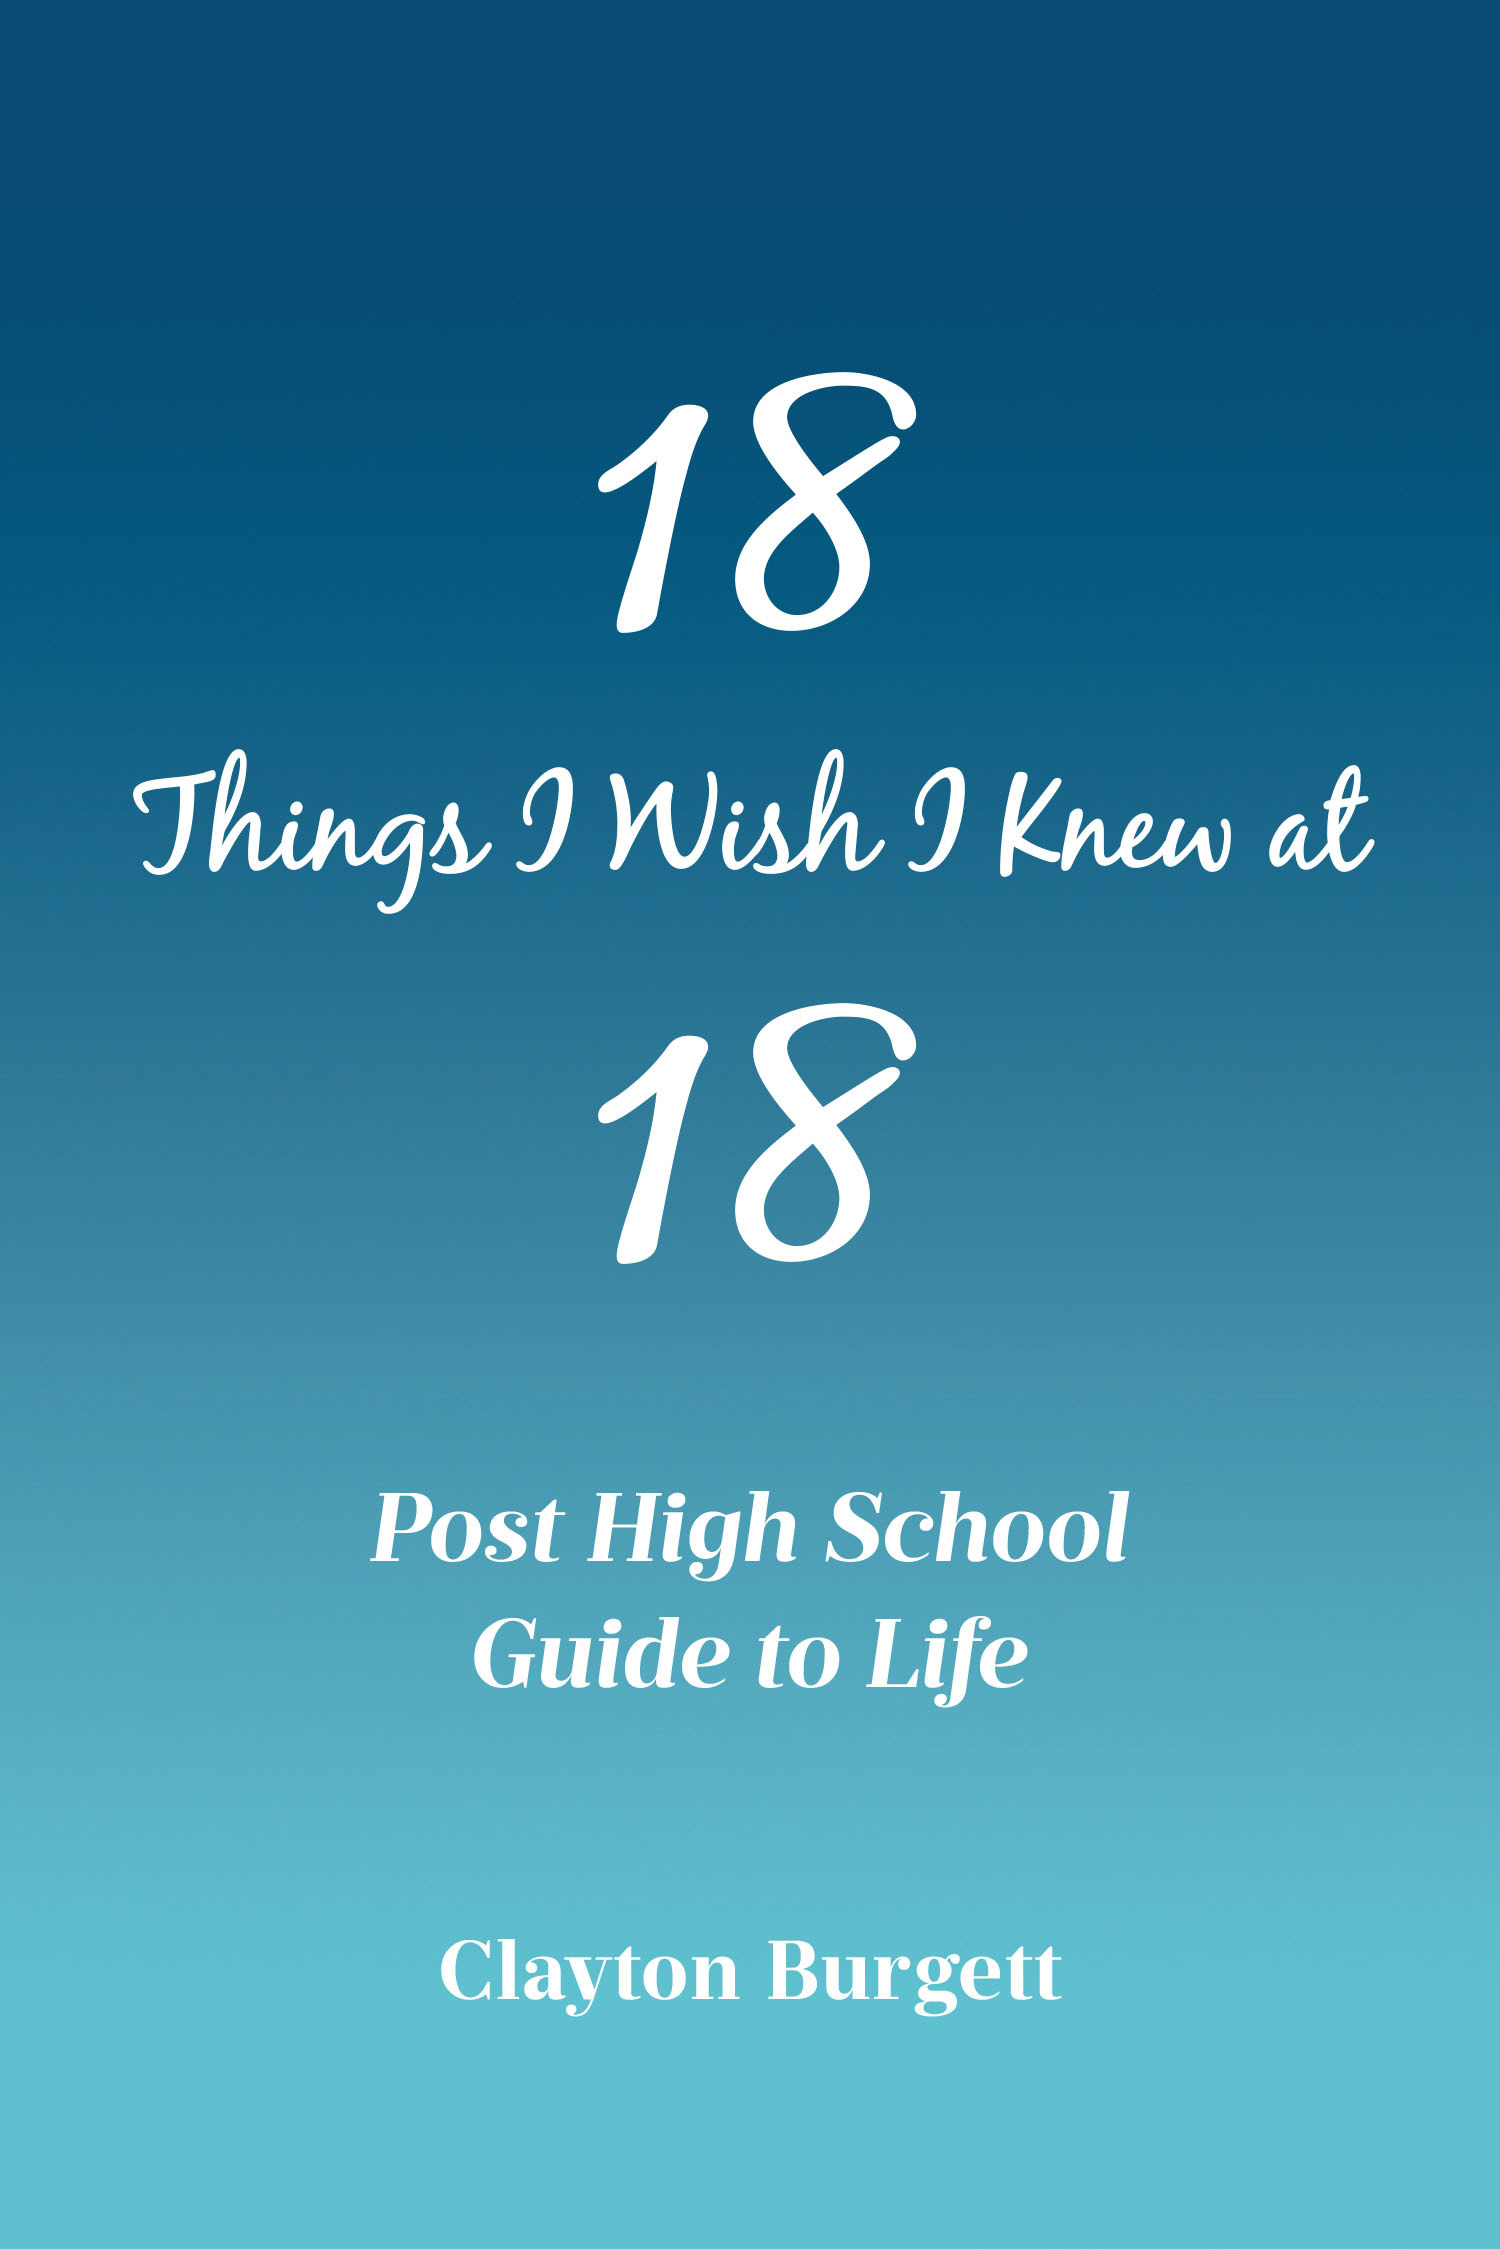 Author Clayton Burgett’s New Book, "18 Things I Wish I Knew at 18: Post High School Guide to Life," is a Comprehensive Roadmap for Those Transitioning Into Adulthood